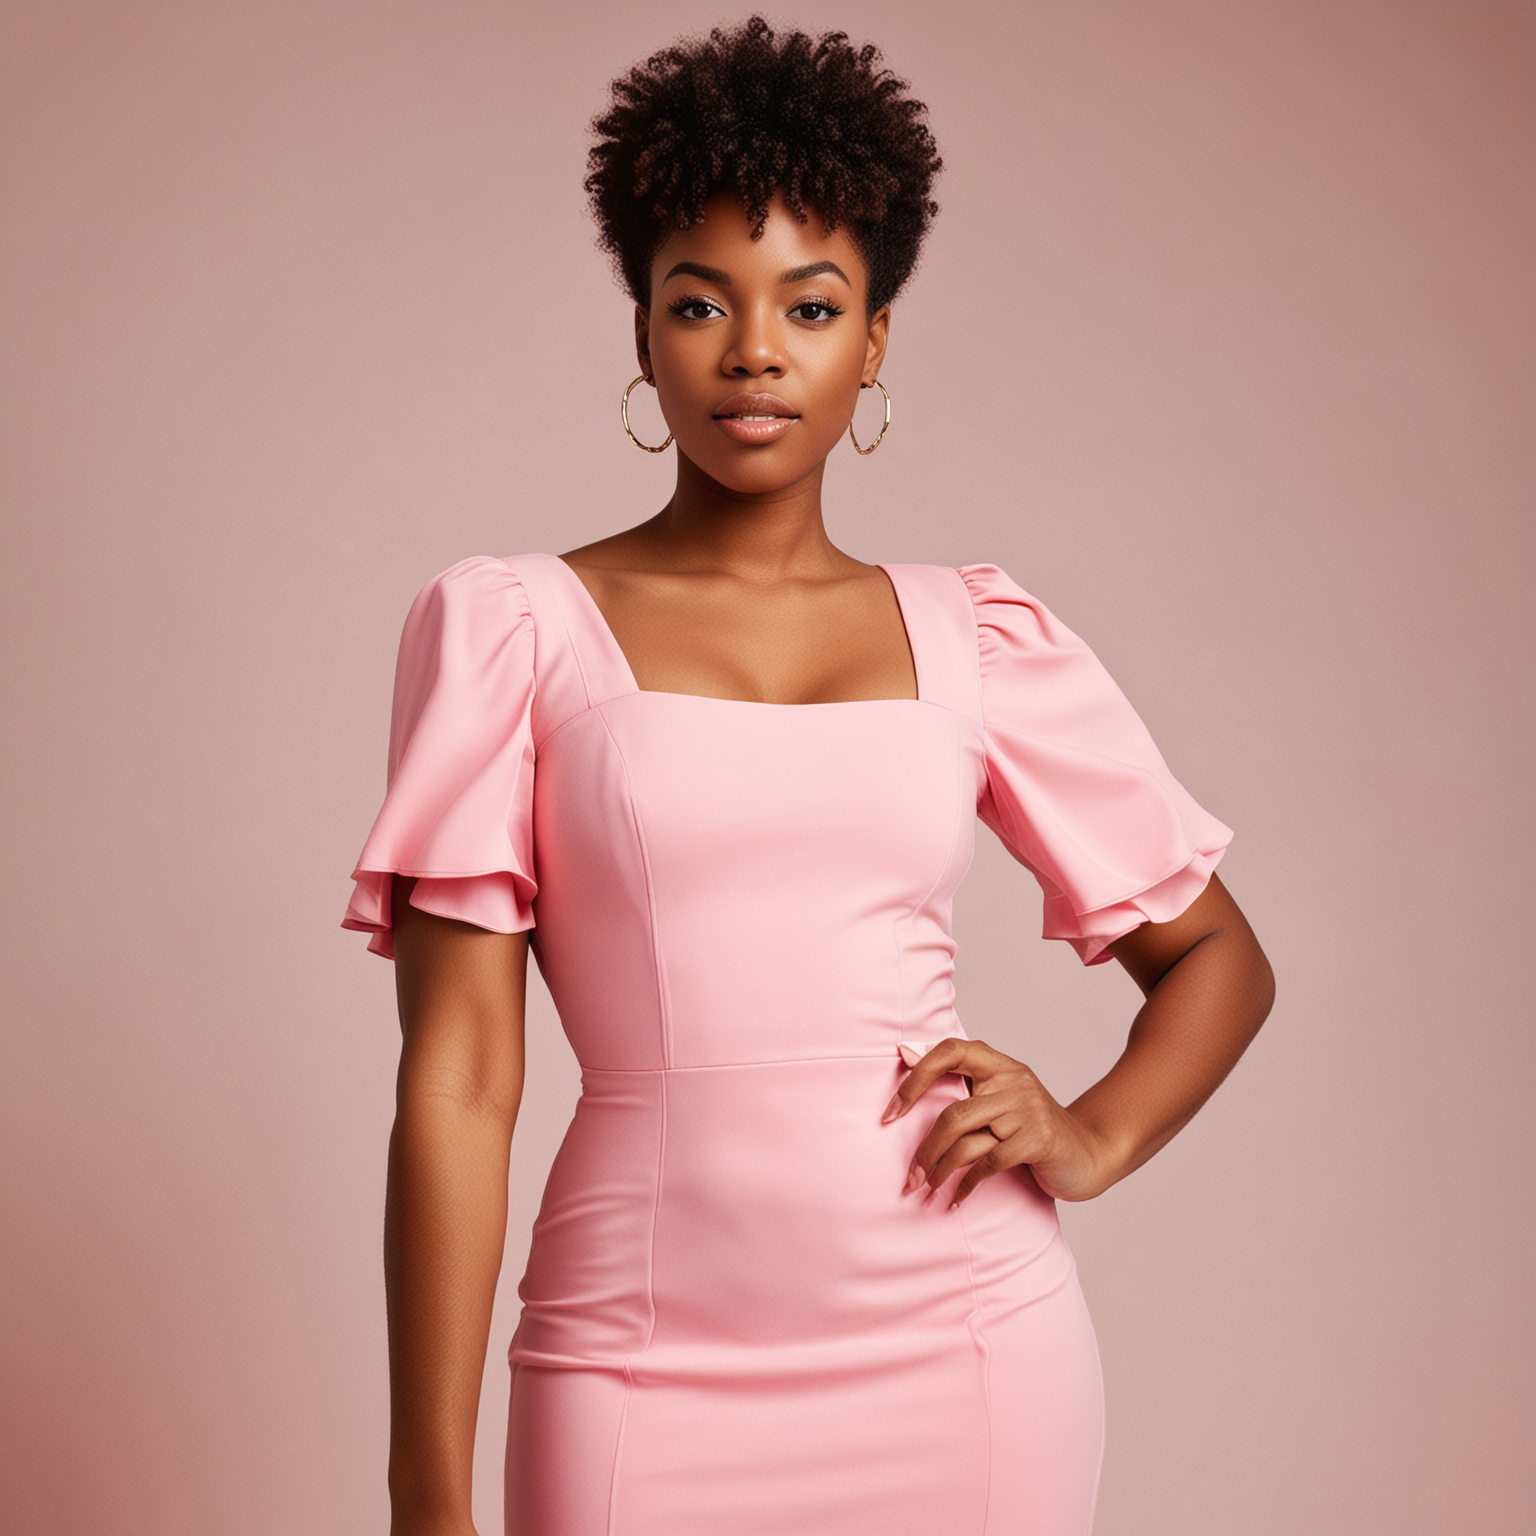 Elegant Black Woman in a Stunning Pink Fitted Dress